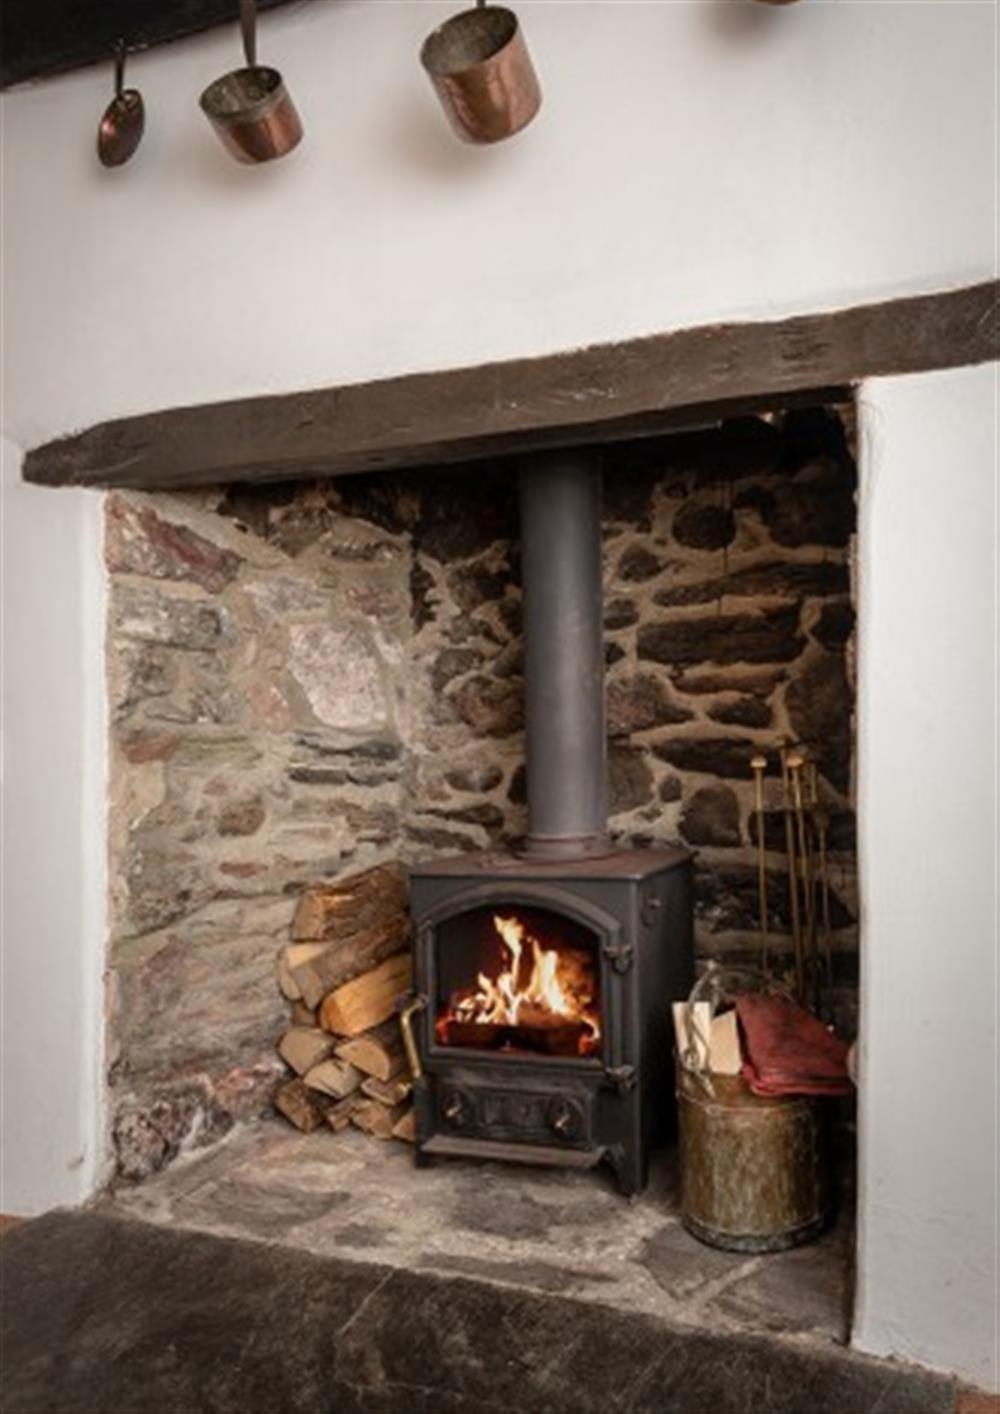 Cosy up in front of the log burner